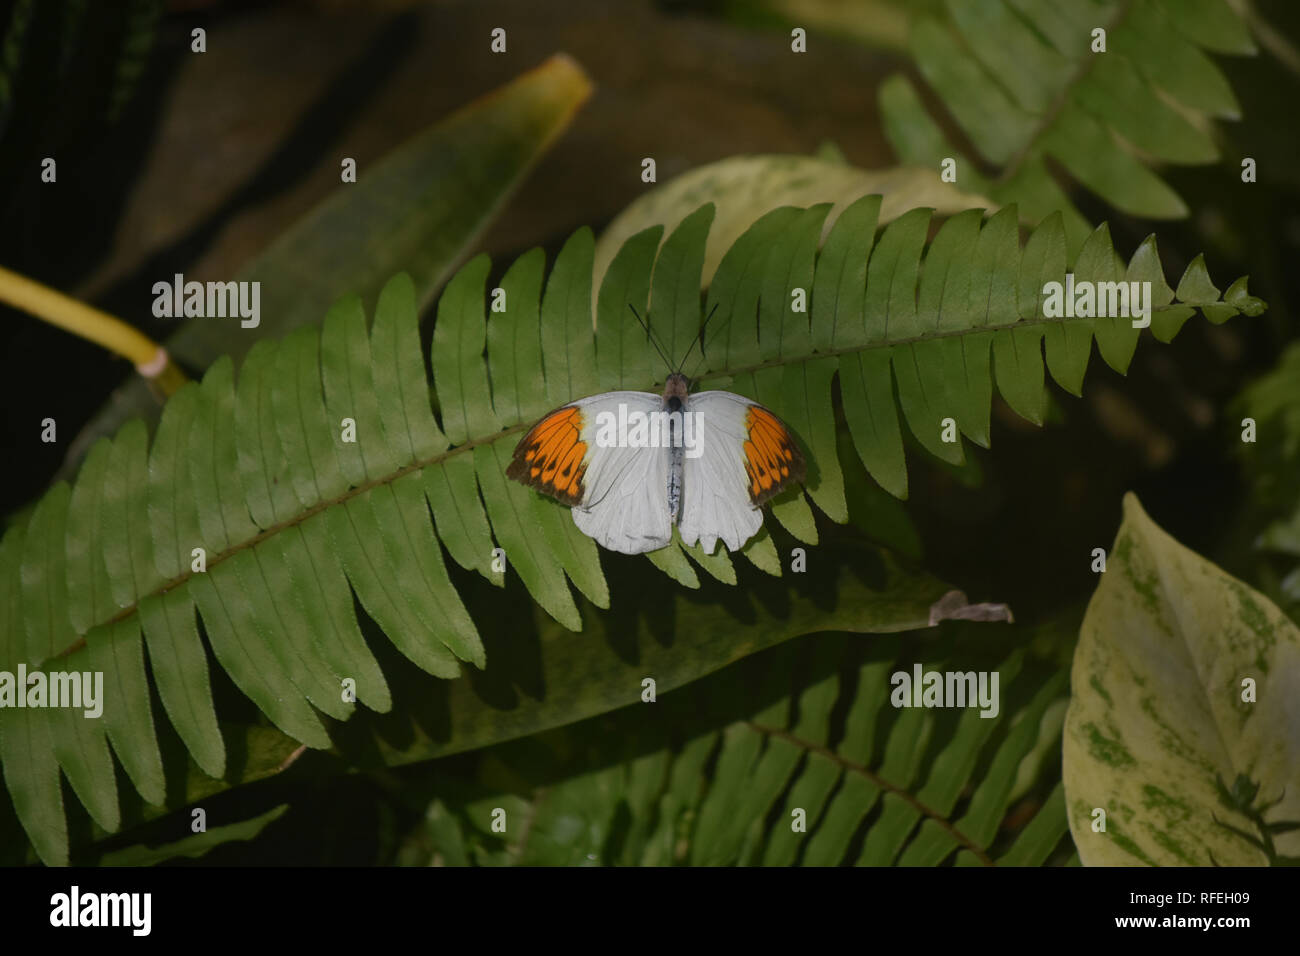 Fern like leaf with an orange tip butterfly. Stock Photo